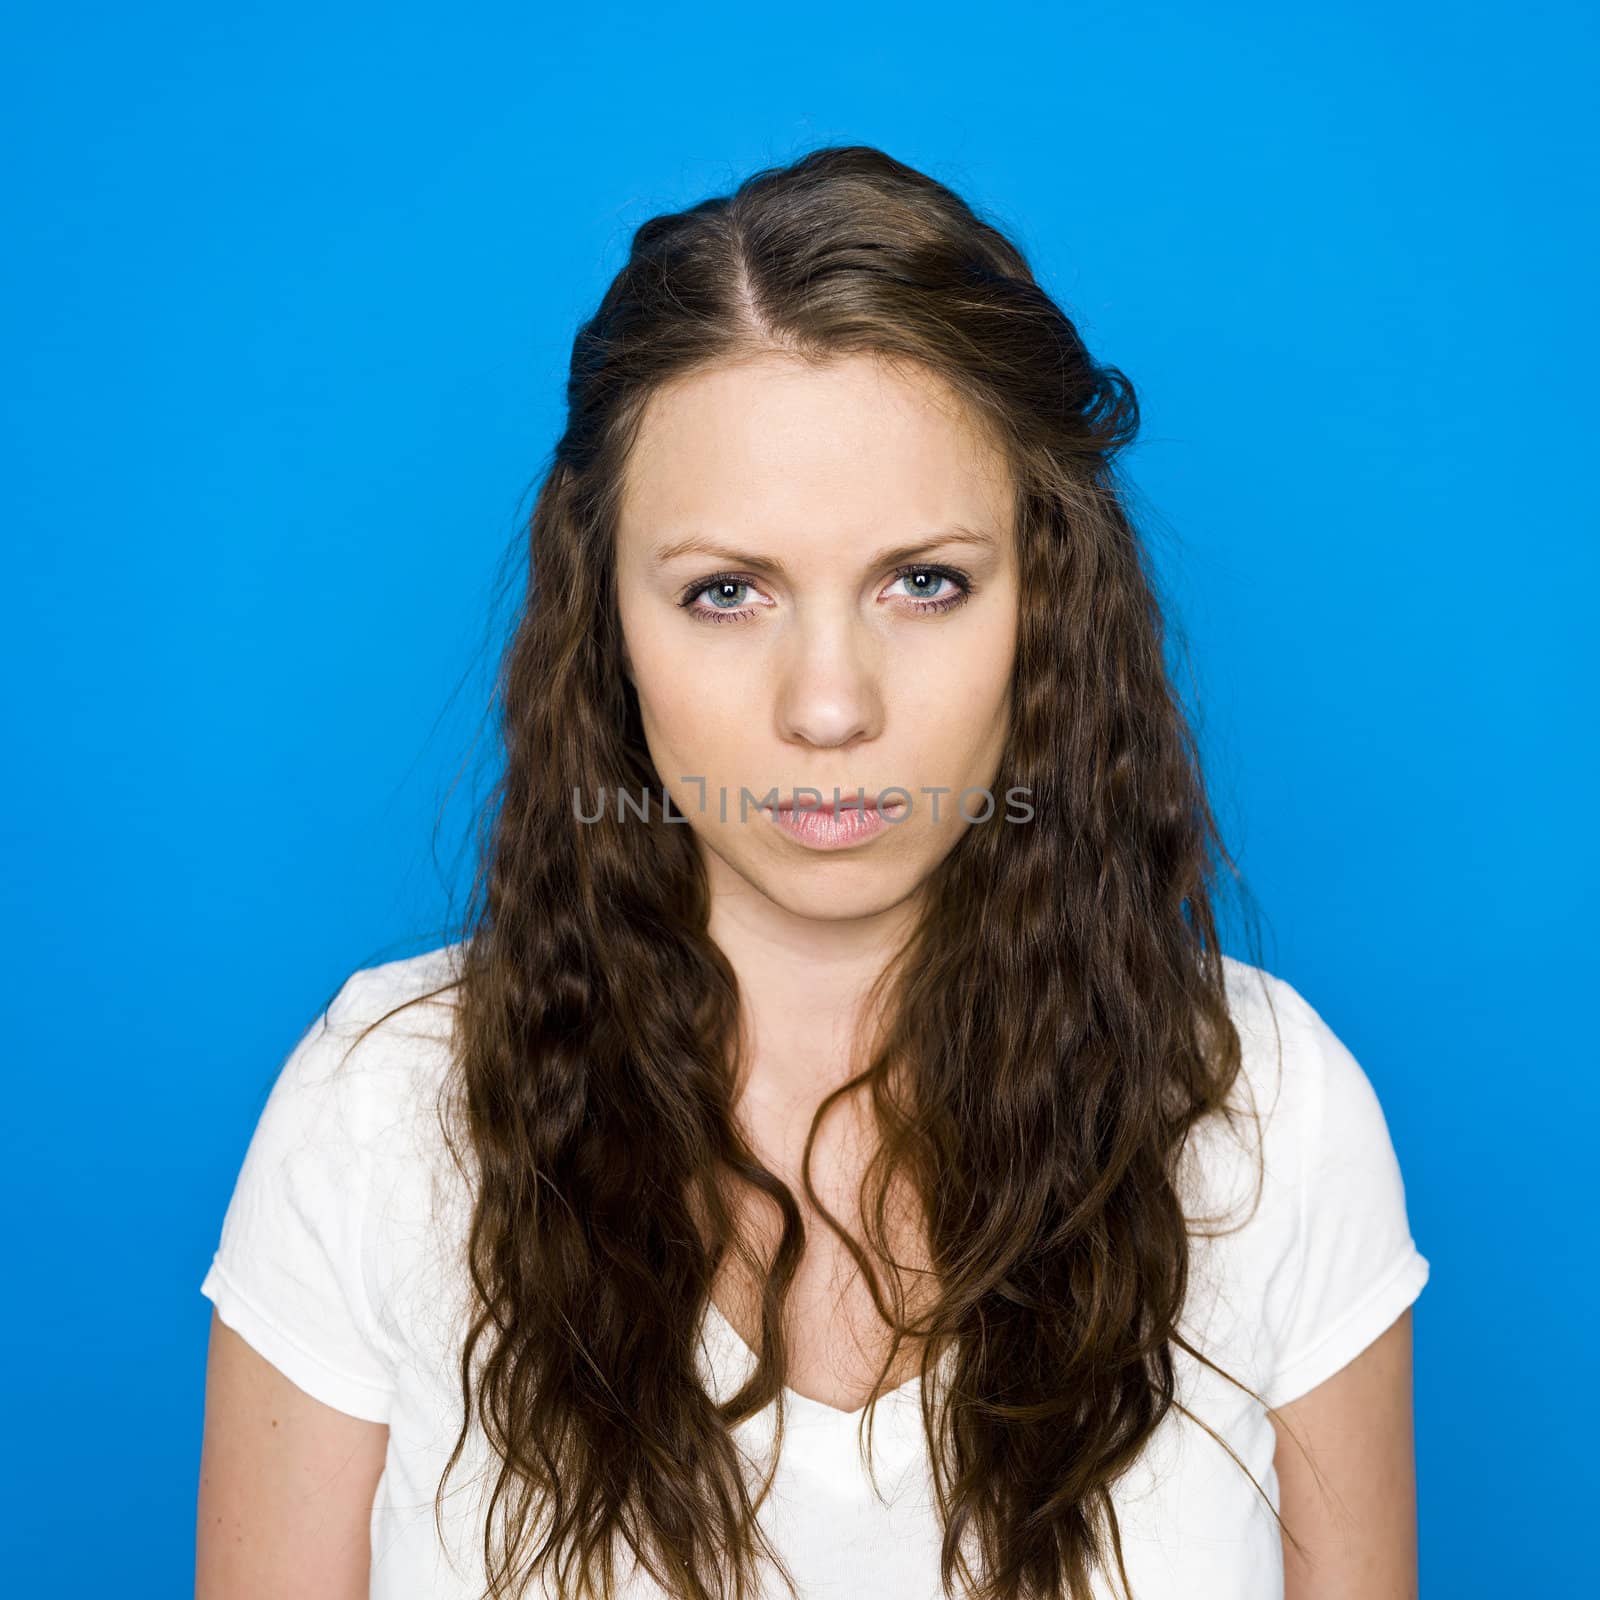 Portrait of a young girl on blue background